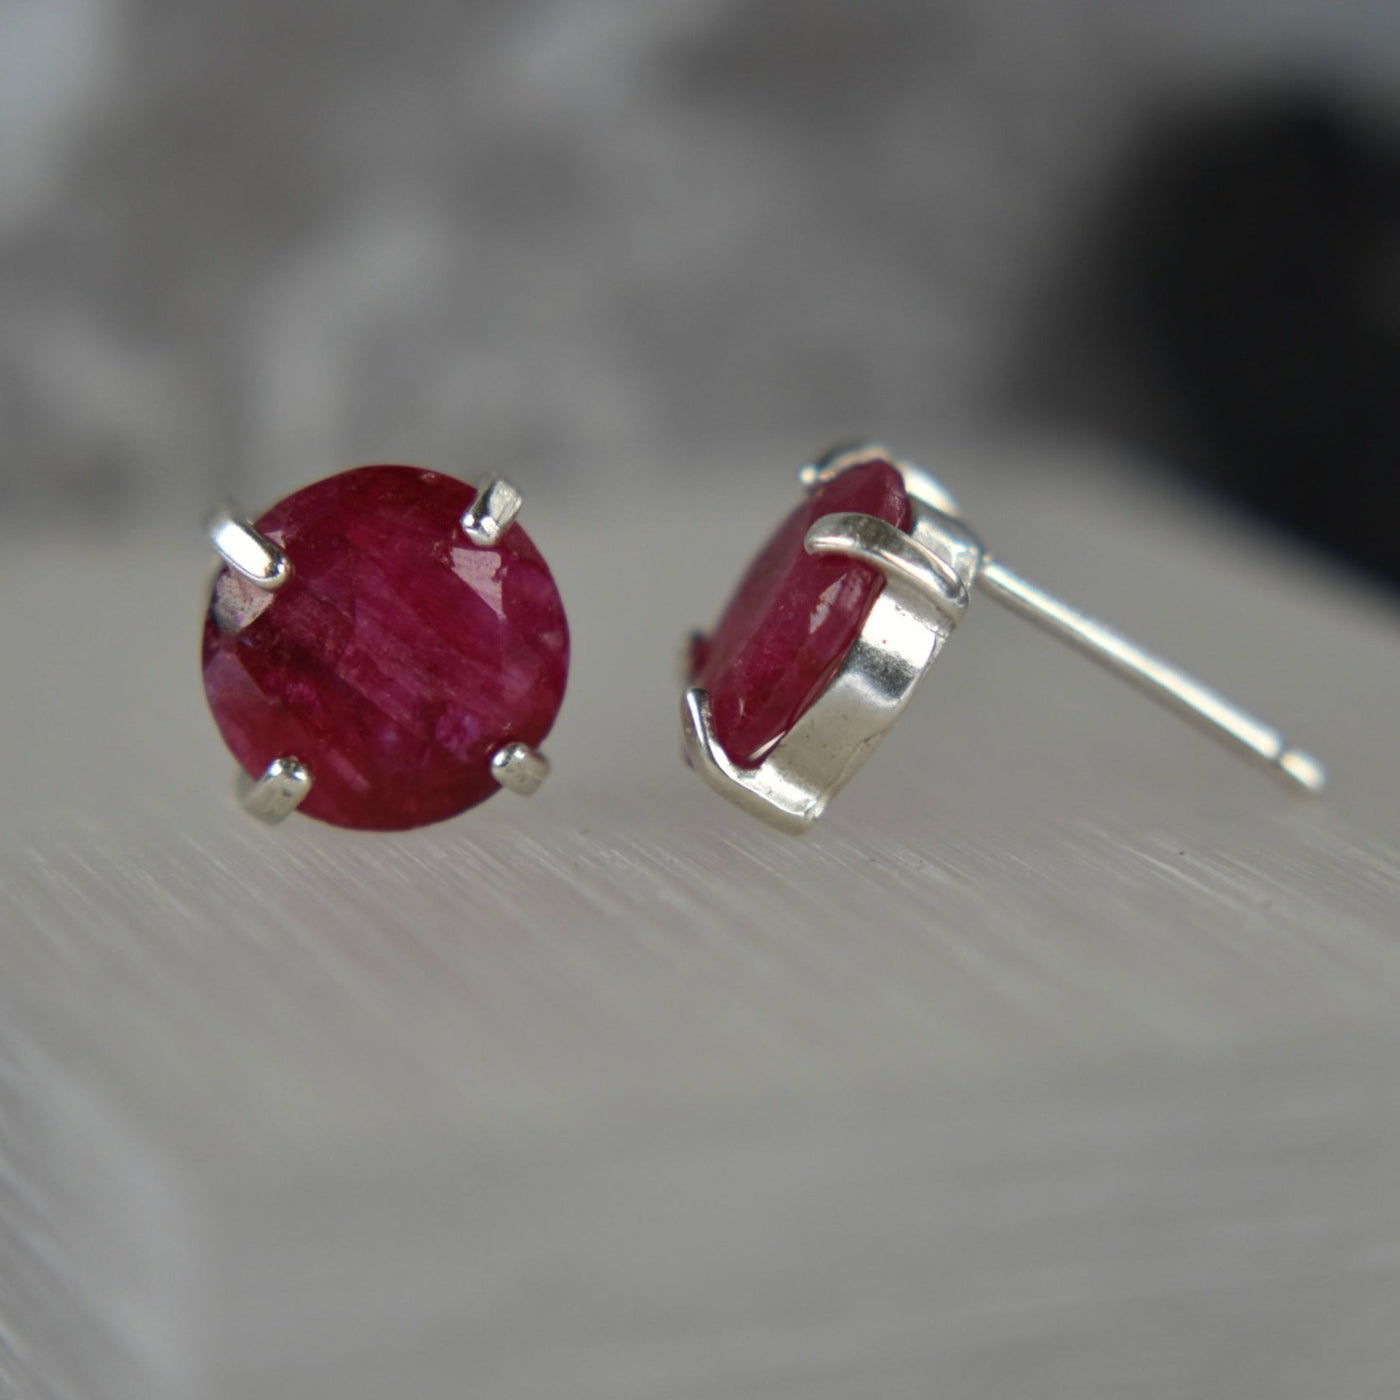 dark red rubies, rubies with veins, natural rubies, July birthstone, ruby encourage joy, Rubys for joy, rubies for laughter, rubies for positive dreams, ruby for reproductive organs, rubies for love, Rubys for new moms, ruby blood flow, ruby heart chakra